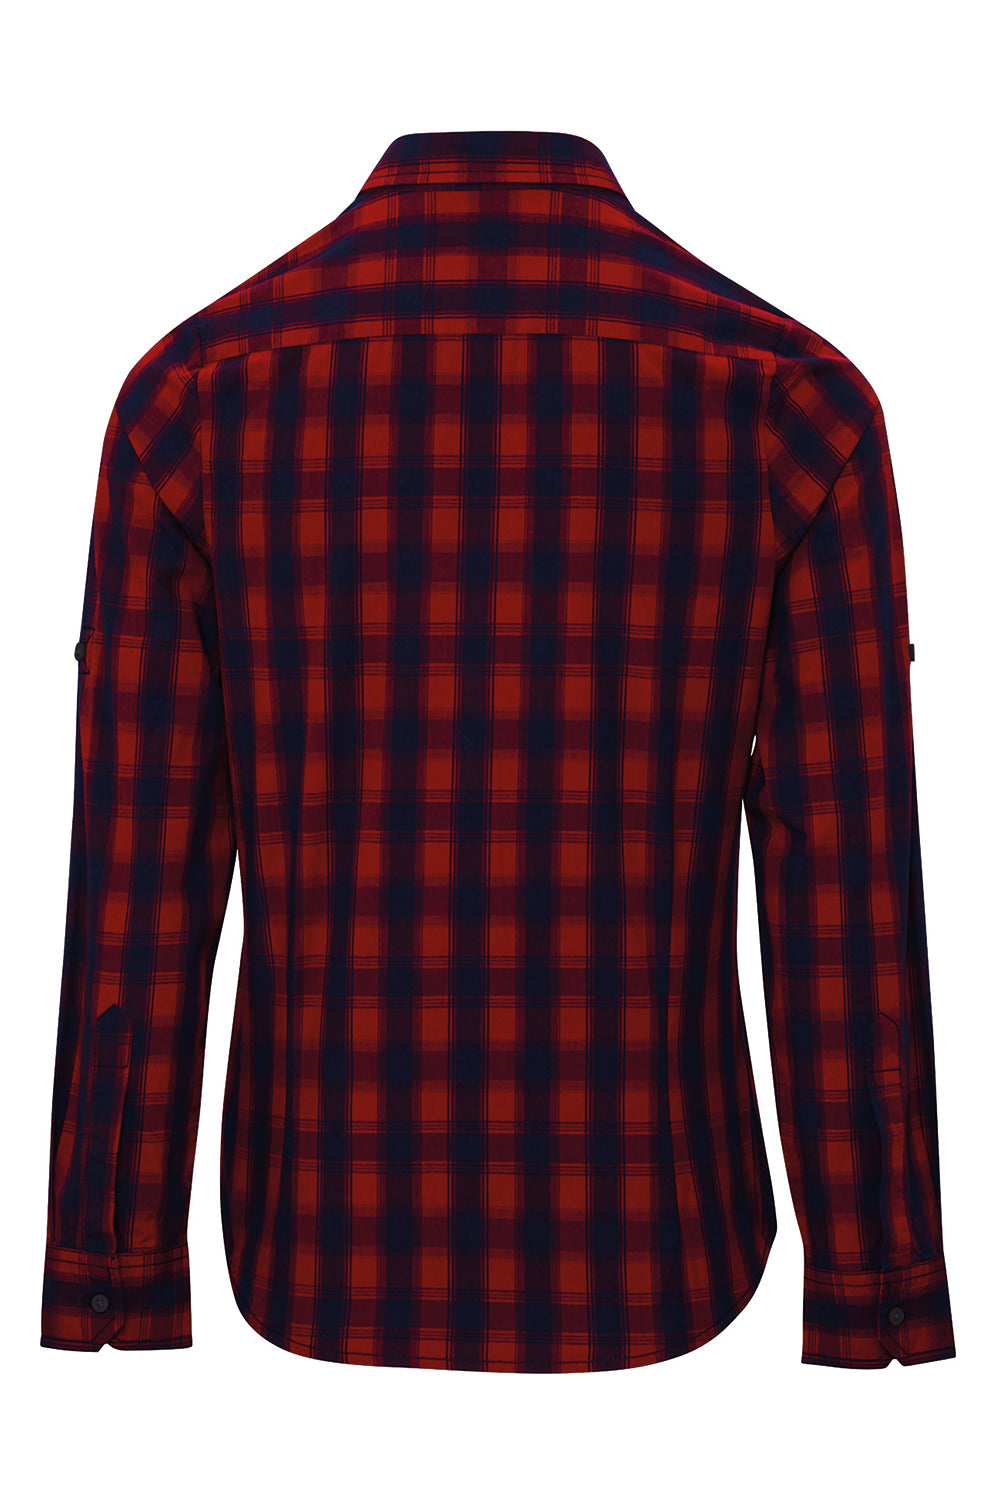 Artisan Collection RP350 Womens Mulligan Check Long Sleeve Button Down Shirt Red/Navy Blue Model Flat Back